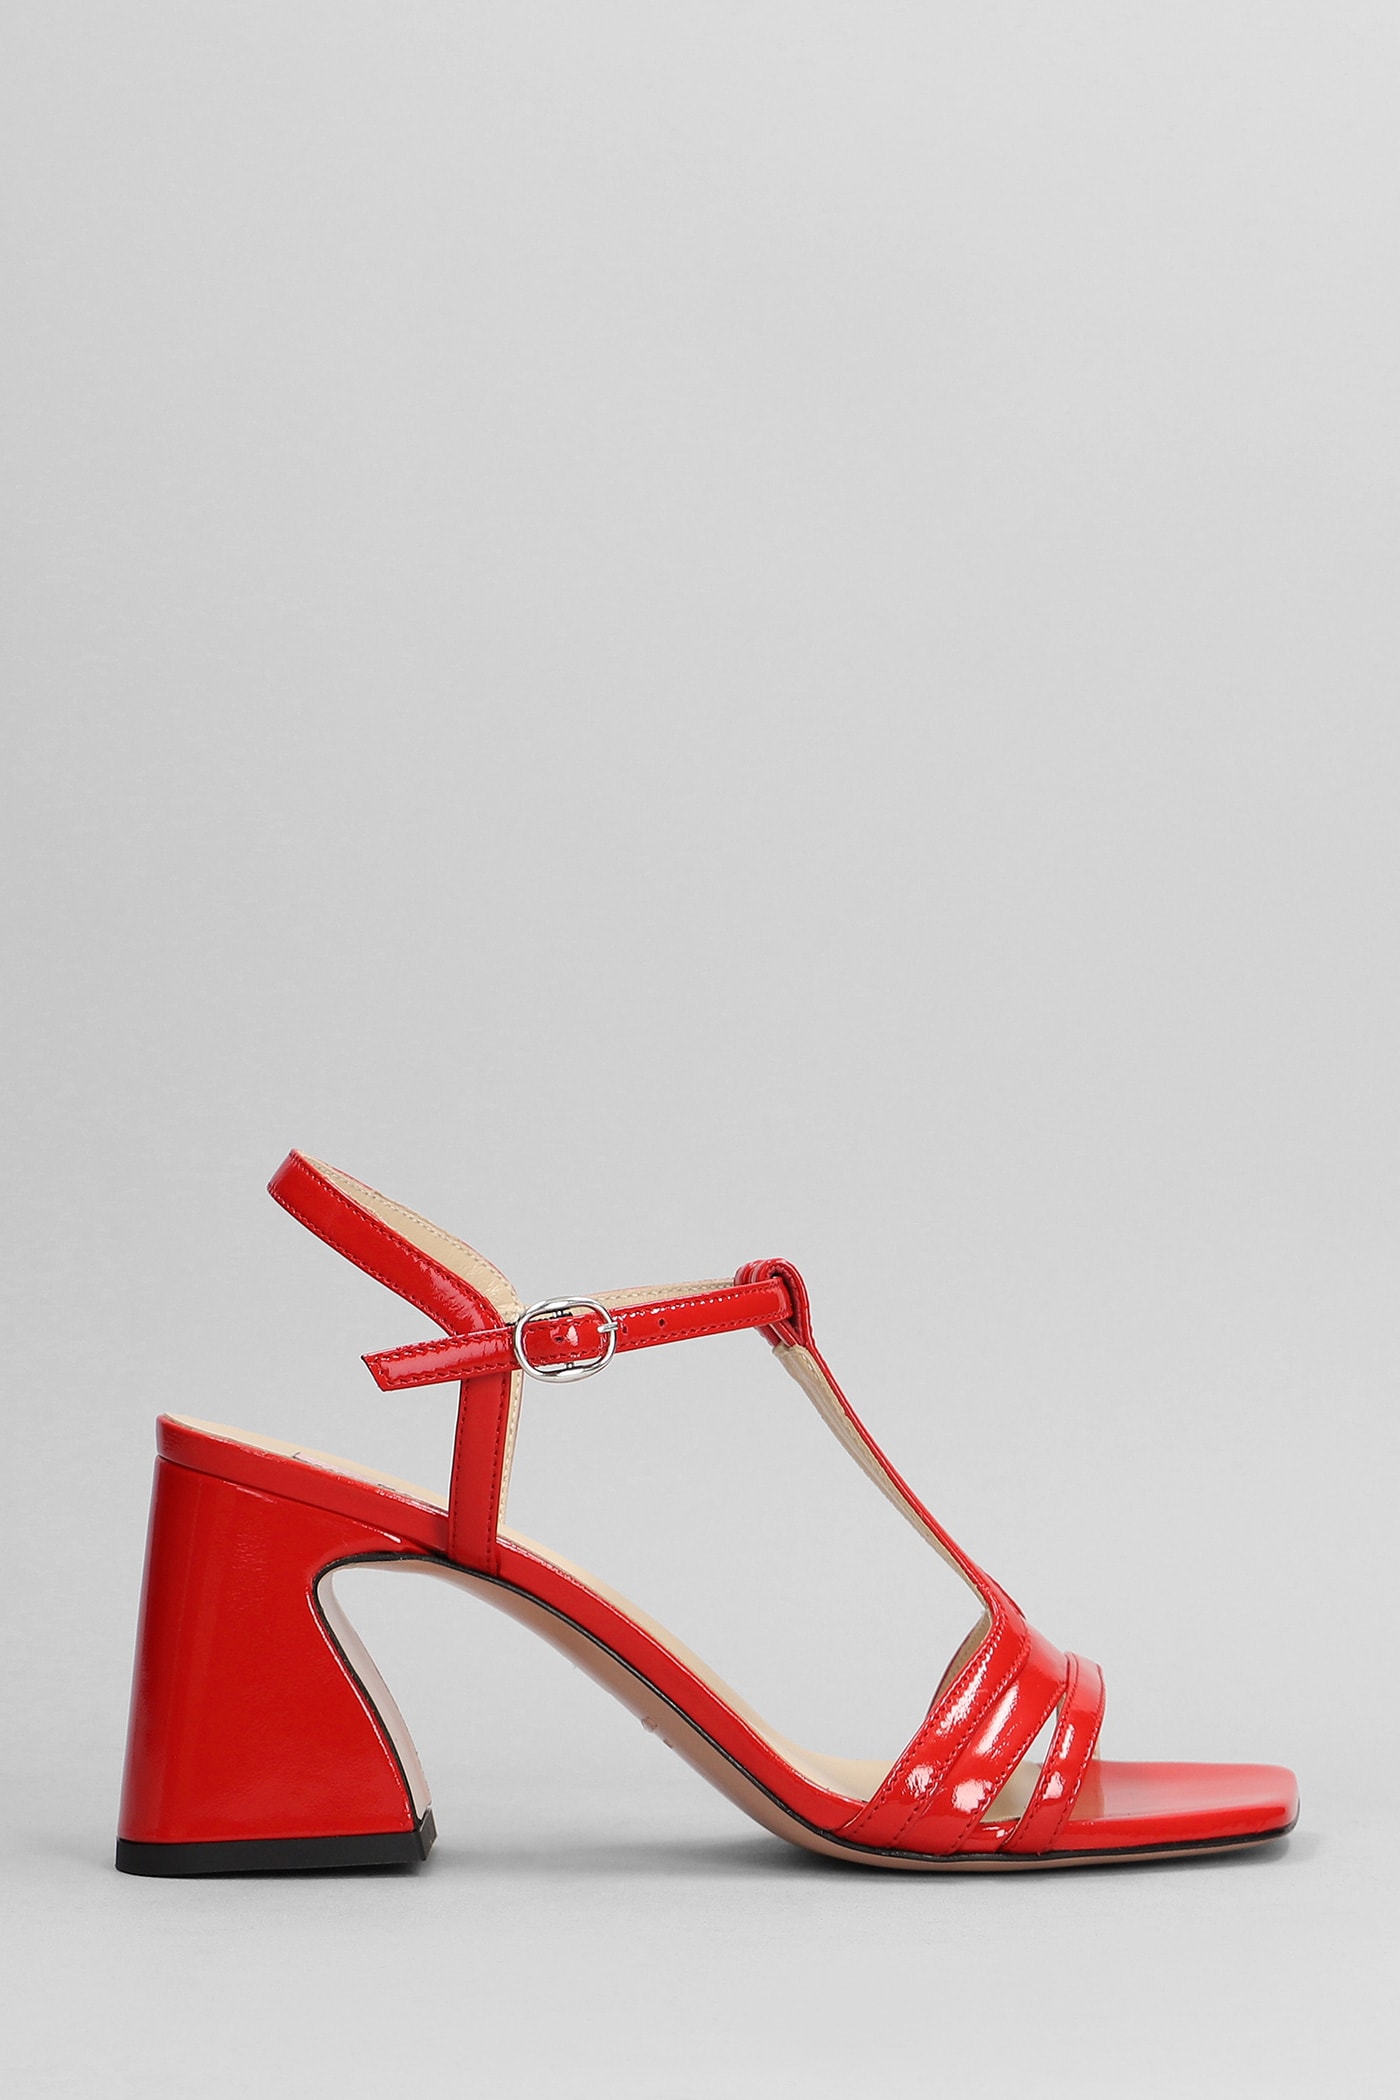 Marc Ellis Sandals In Red Leather